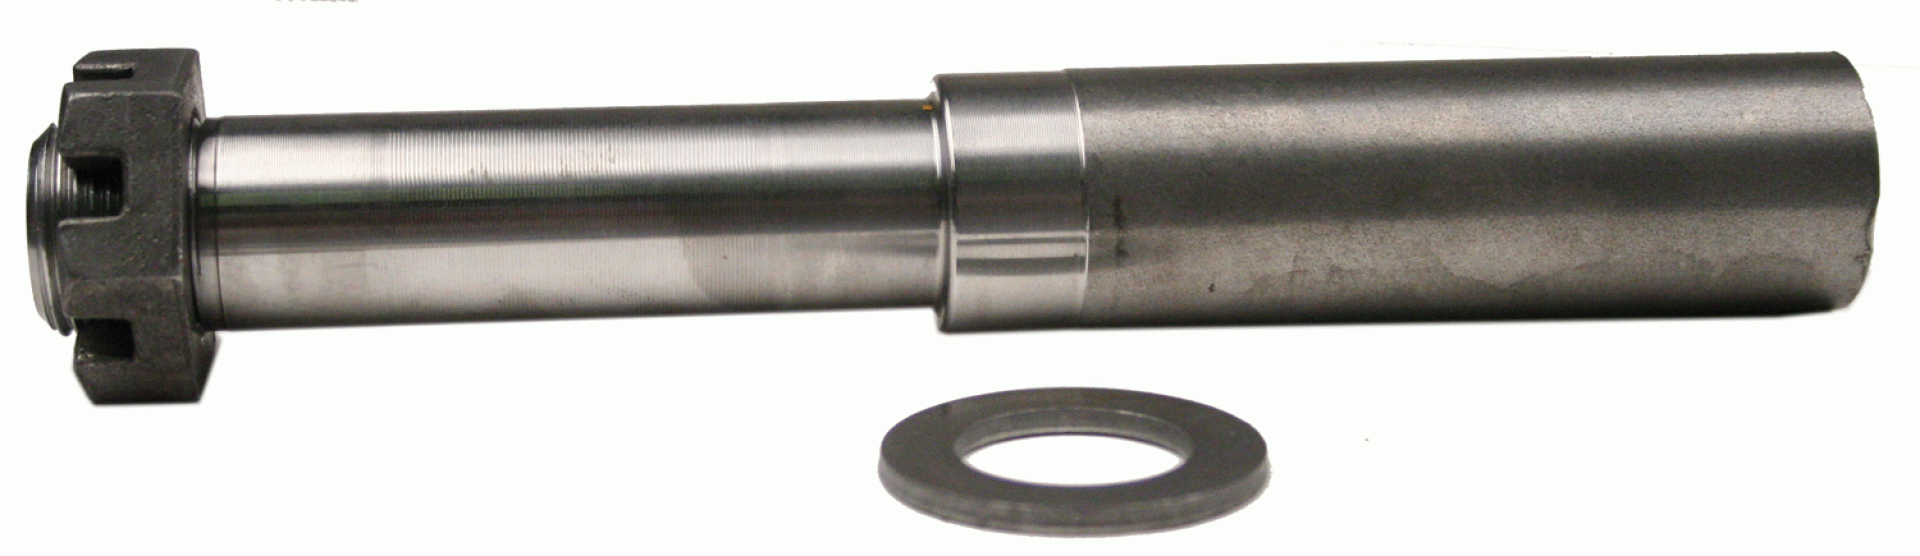 N TOW | 0349 | ROUND STUB STRAIGHT SPINDLE - CAPACITY PER PAIR: 2500 LBS